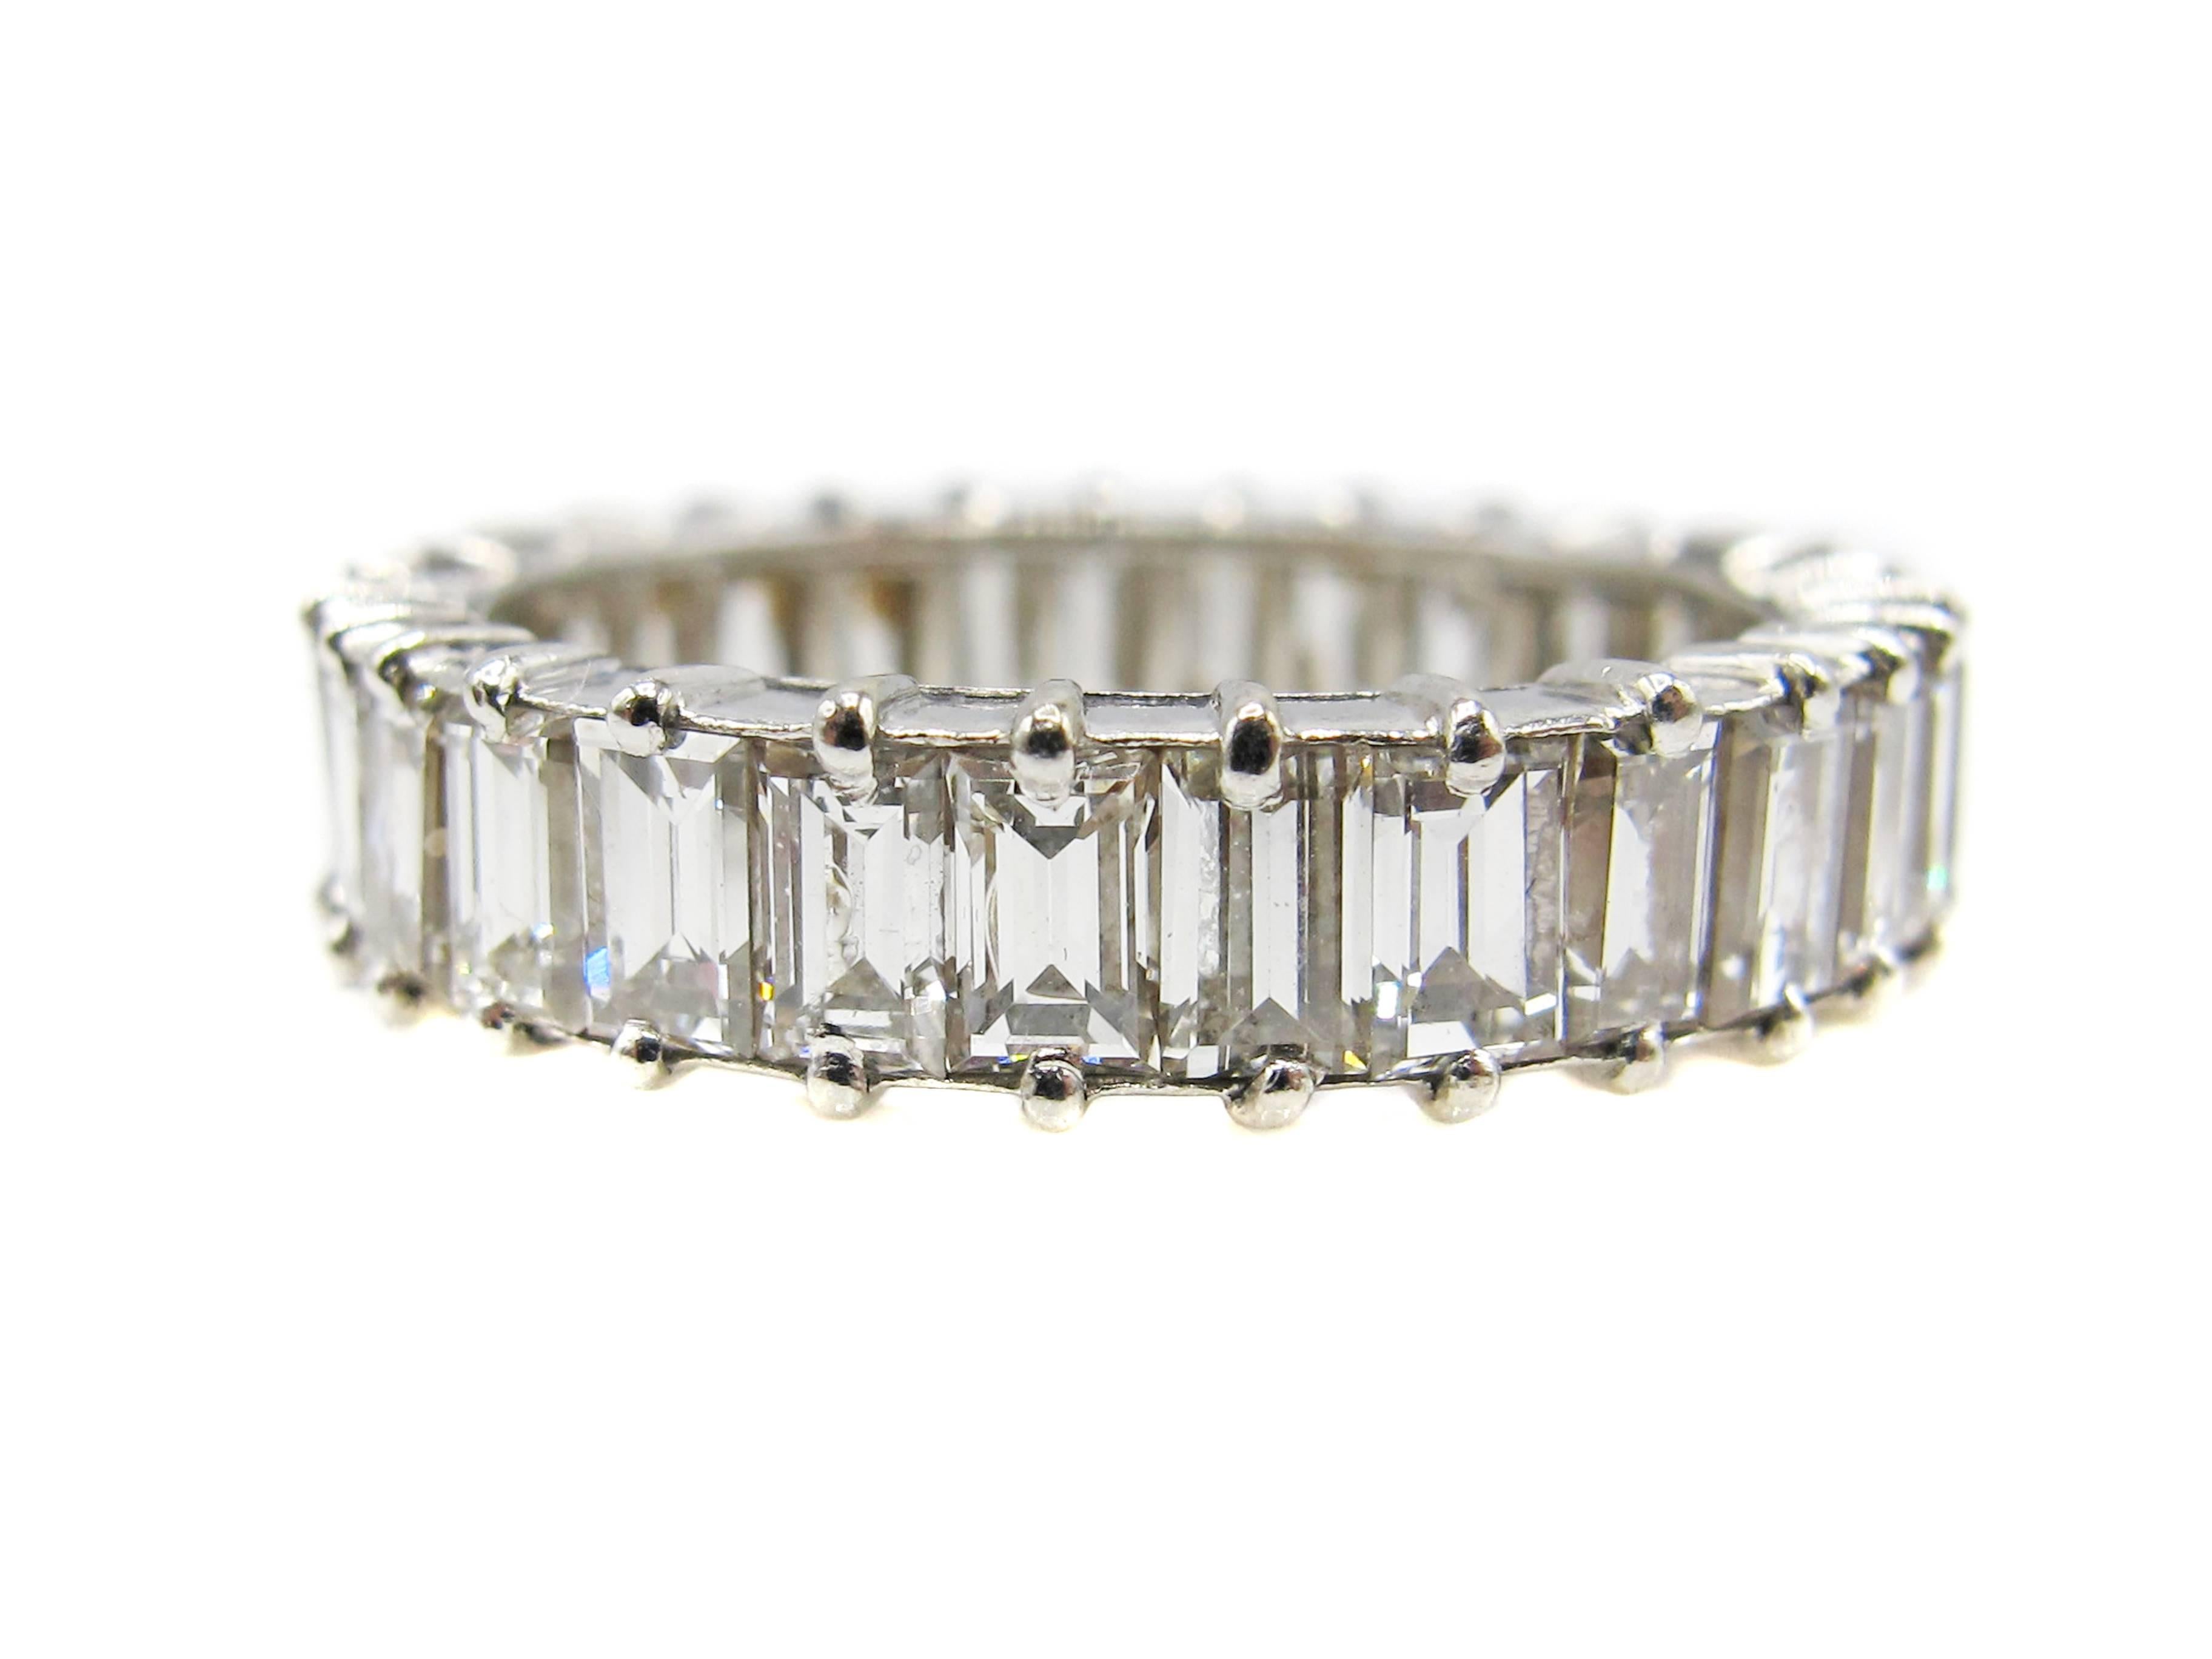 Incredibly well hand crafted French platinum baguette diamond eternity band prong set with 29 bright white baguette cut diamonds weighing approximatley 3.50 carats. Each diamond has been picked to perfectly match the others in cut, clarity and